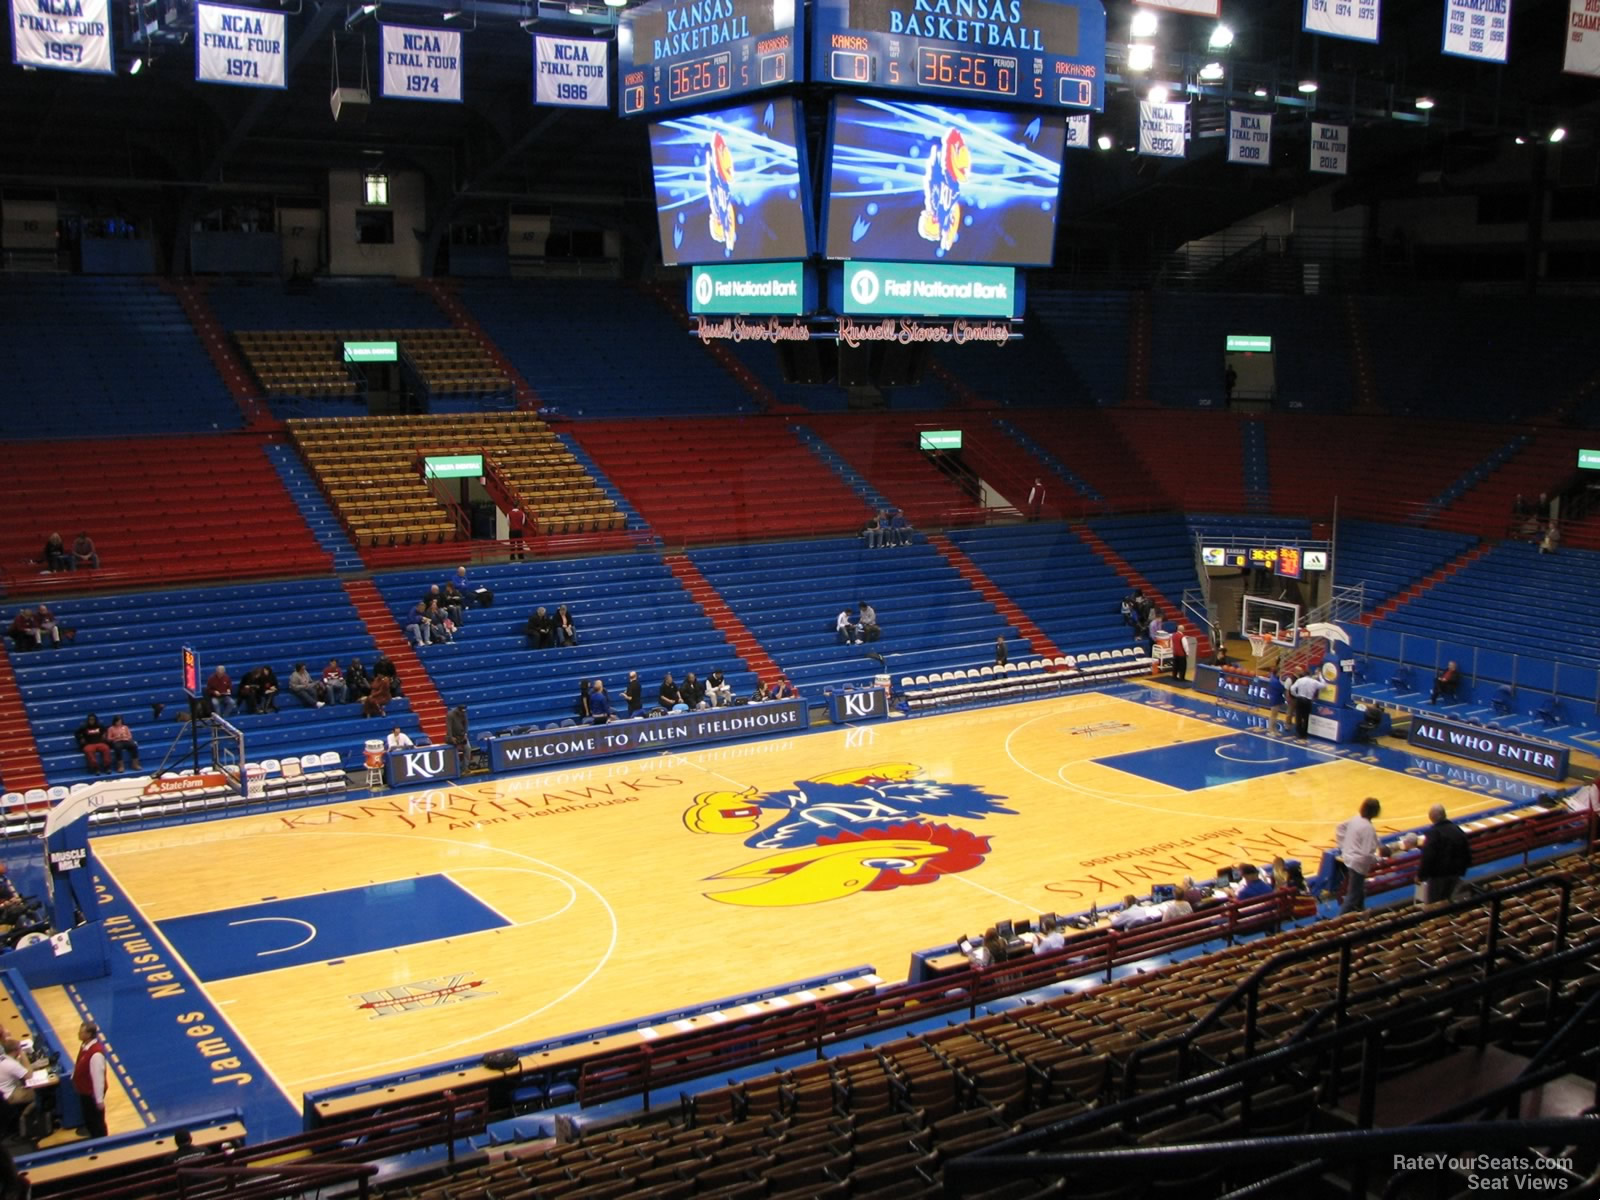 section 8, row 18 seat view  - allen fieldhouse